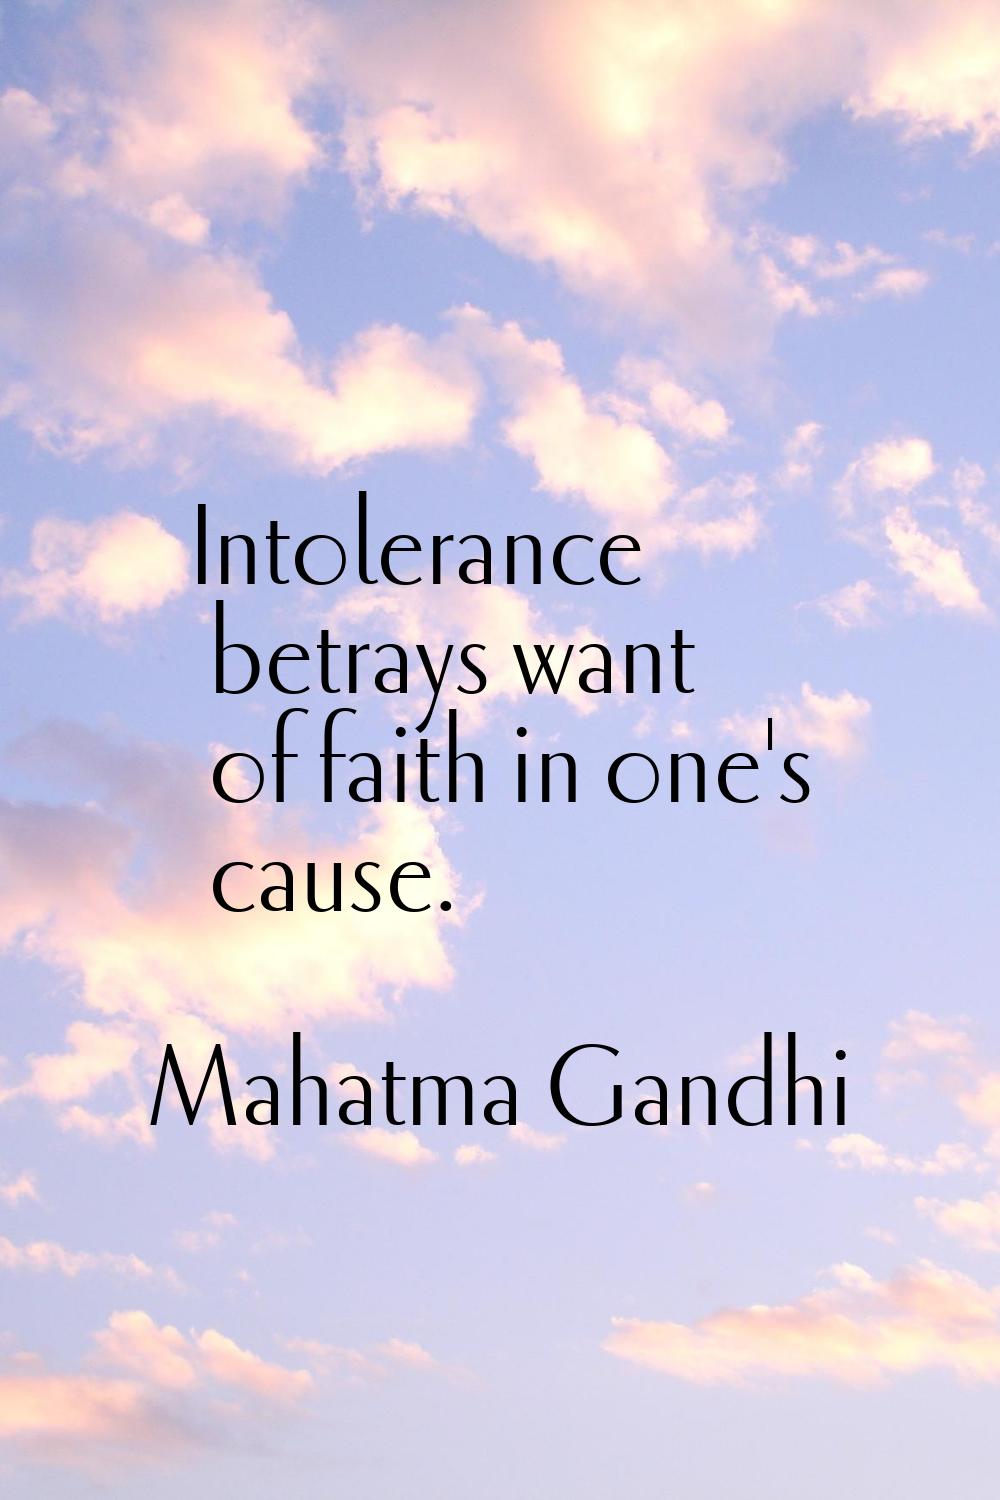 Intolerance betrays want of faith in one's cause.